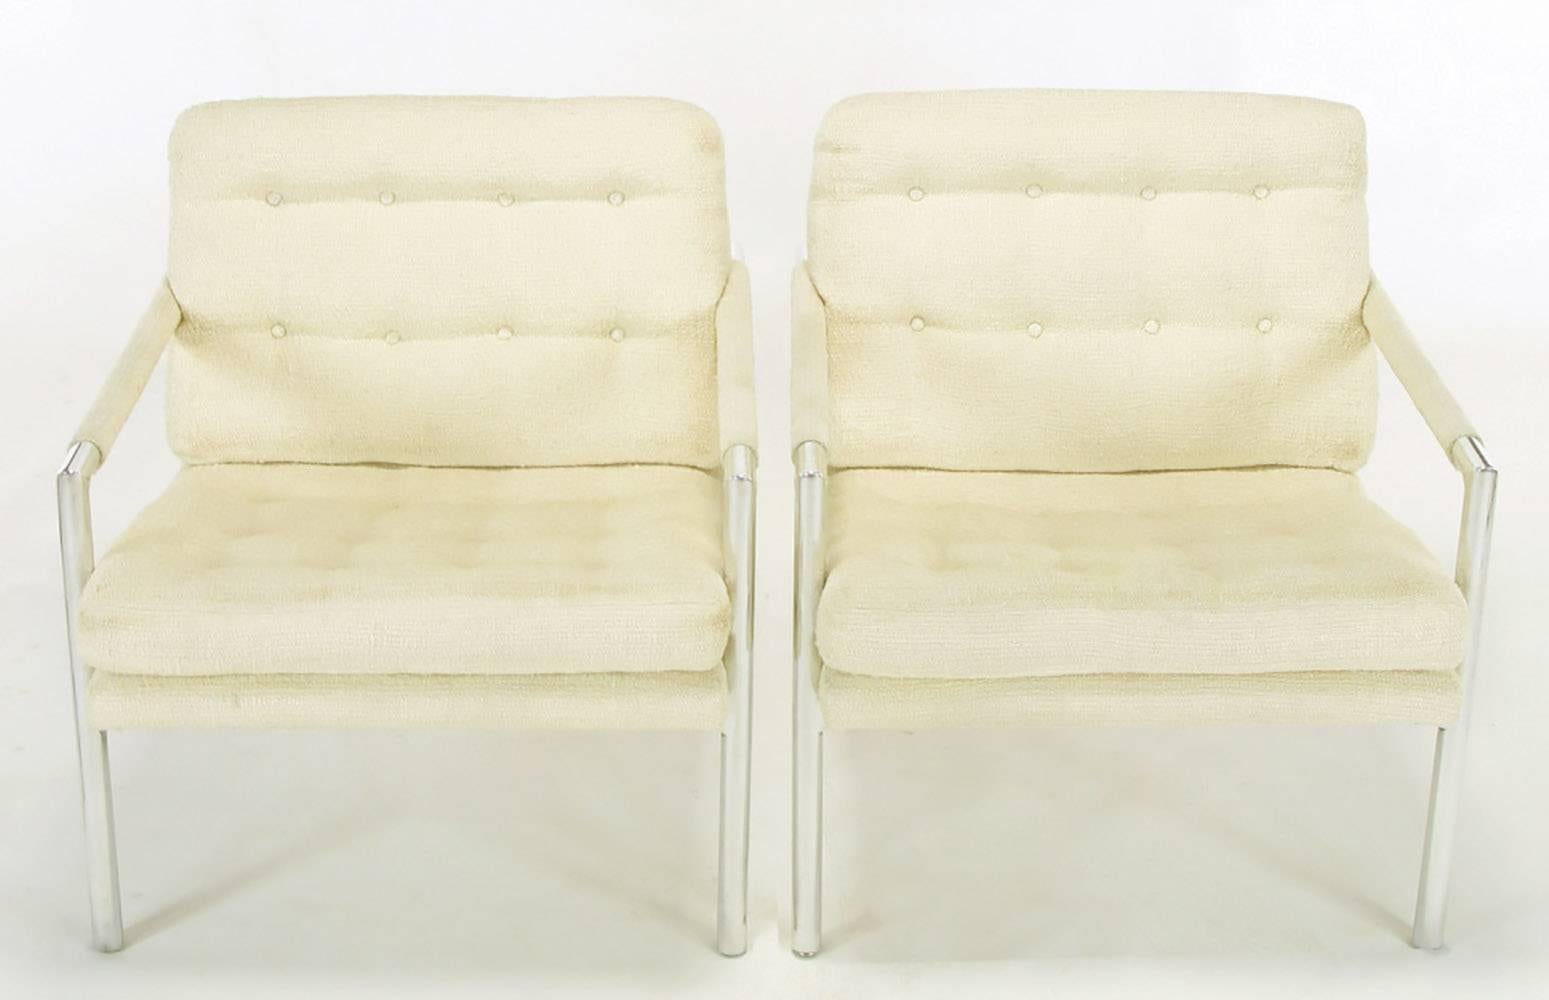 Polished aluminum frame lounge chairs, in the manner of Harvey Probber, with ivory silk/linen blended upholstery. Unexpected details come in the form of exposed oversized flat head screws that support the combination seat and back platform. Button